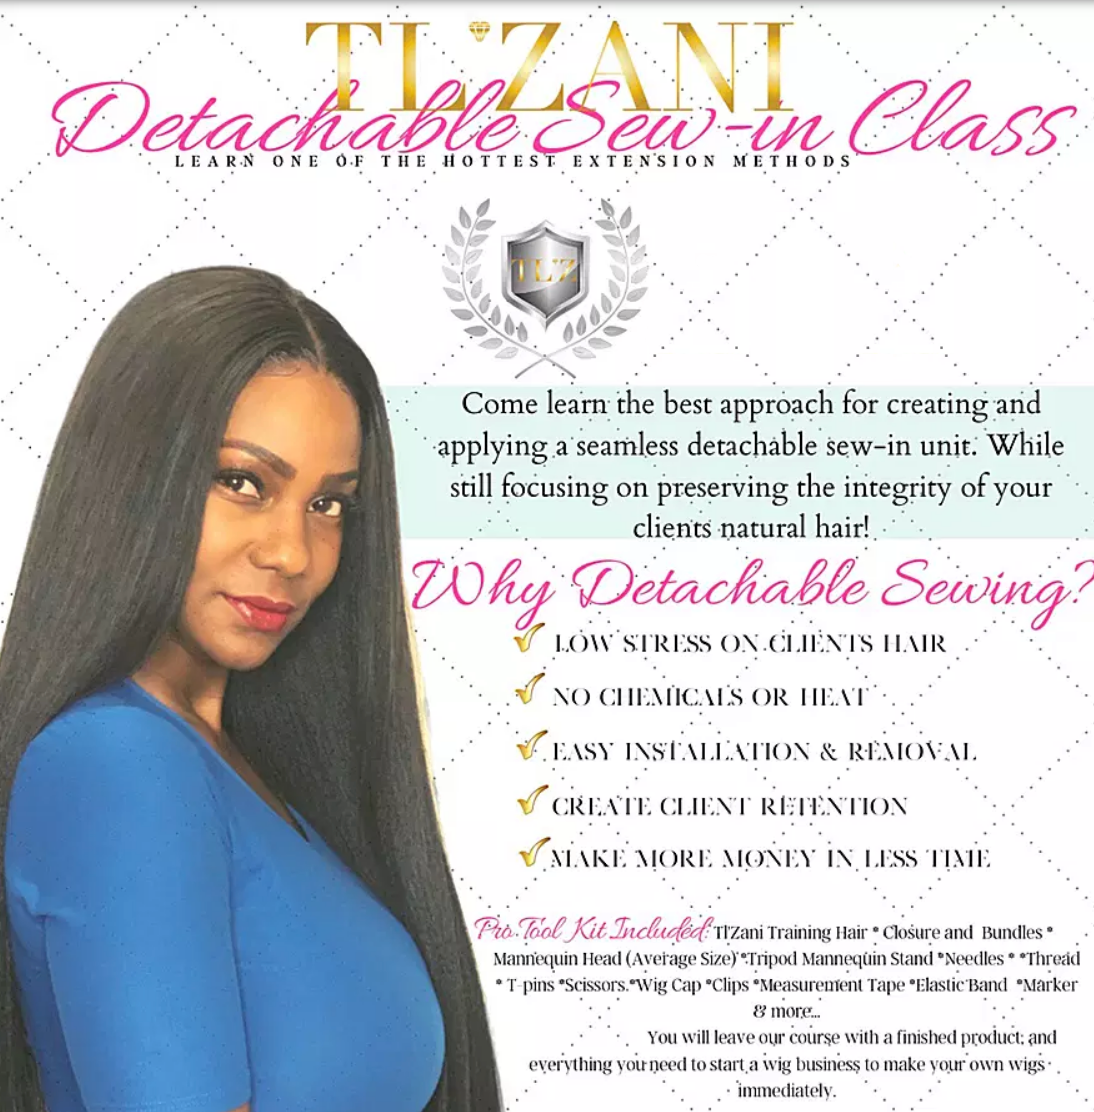 Lace Wig Making Class Flyer, Lace Wig Flyer, Hair Extension Flyer